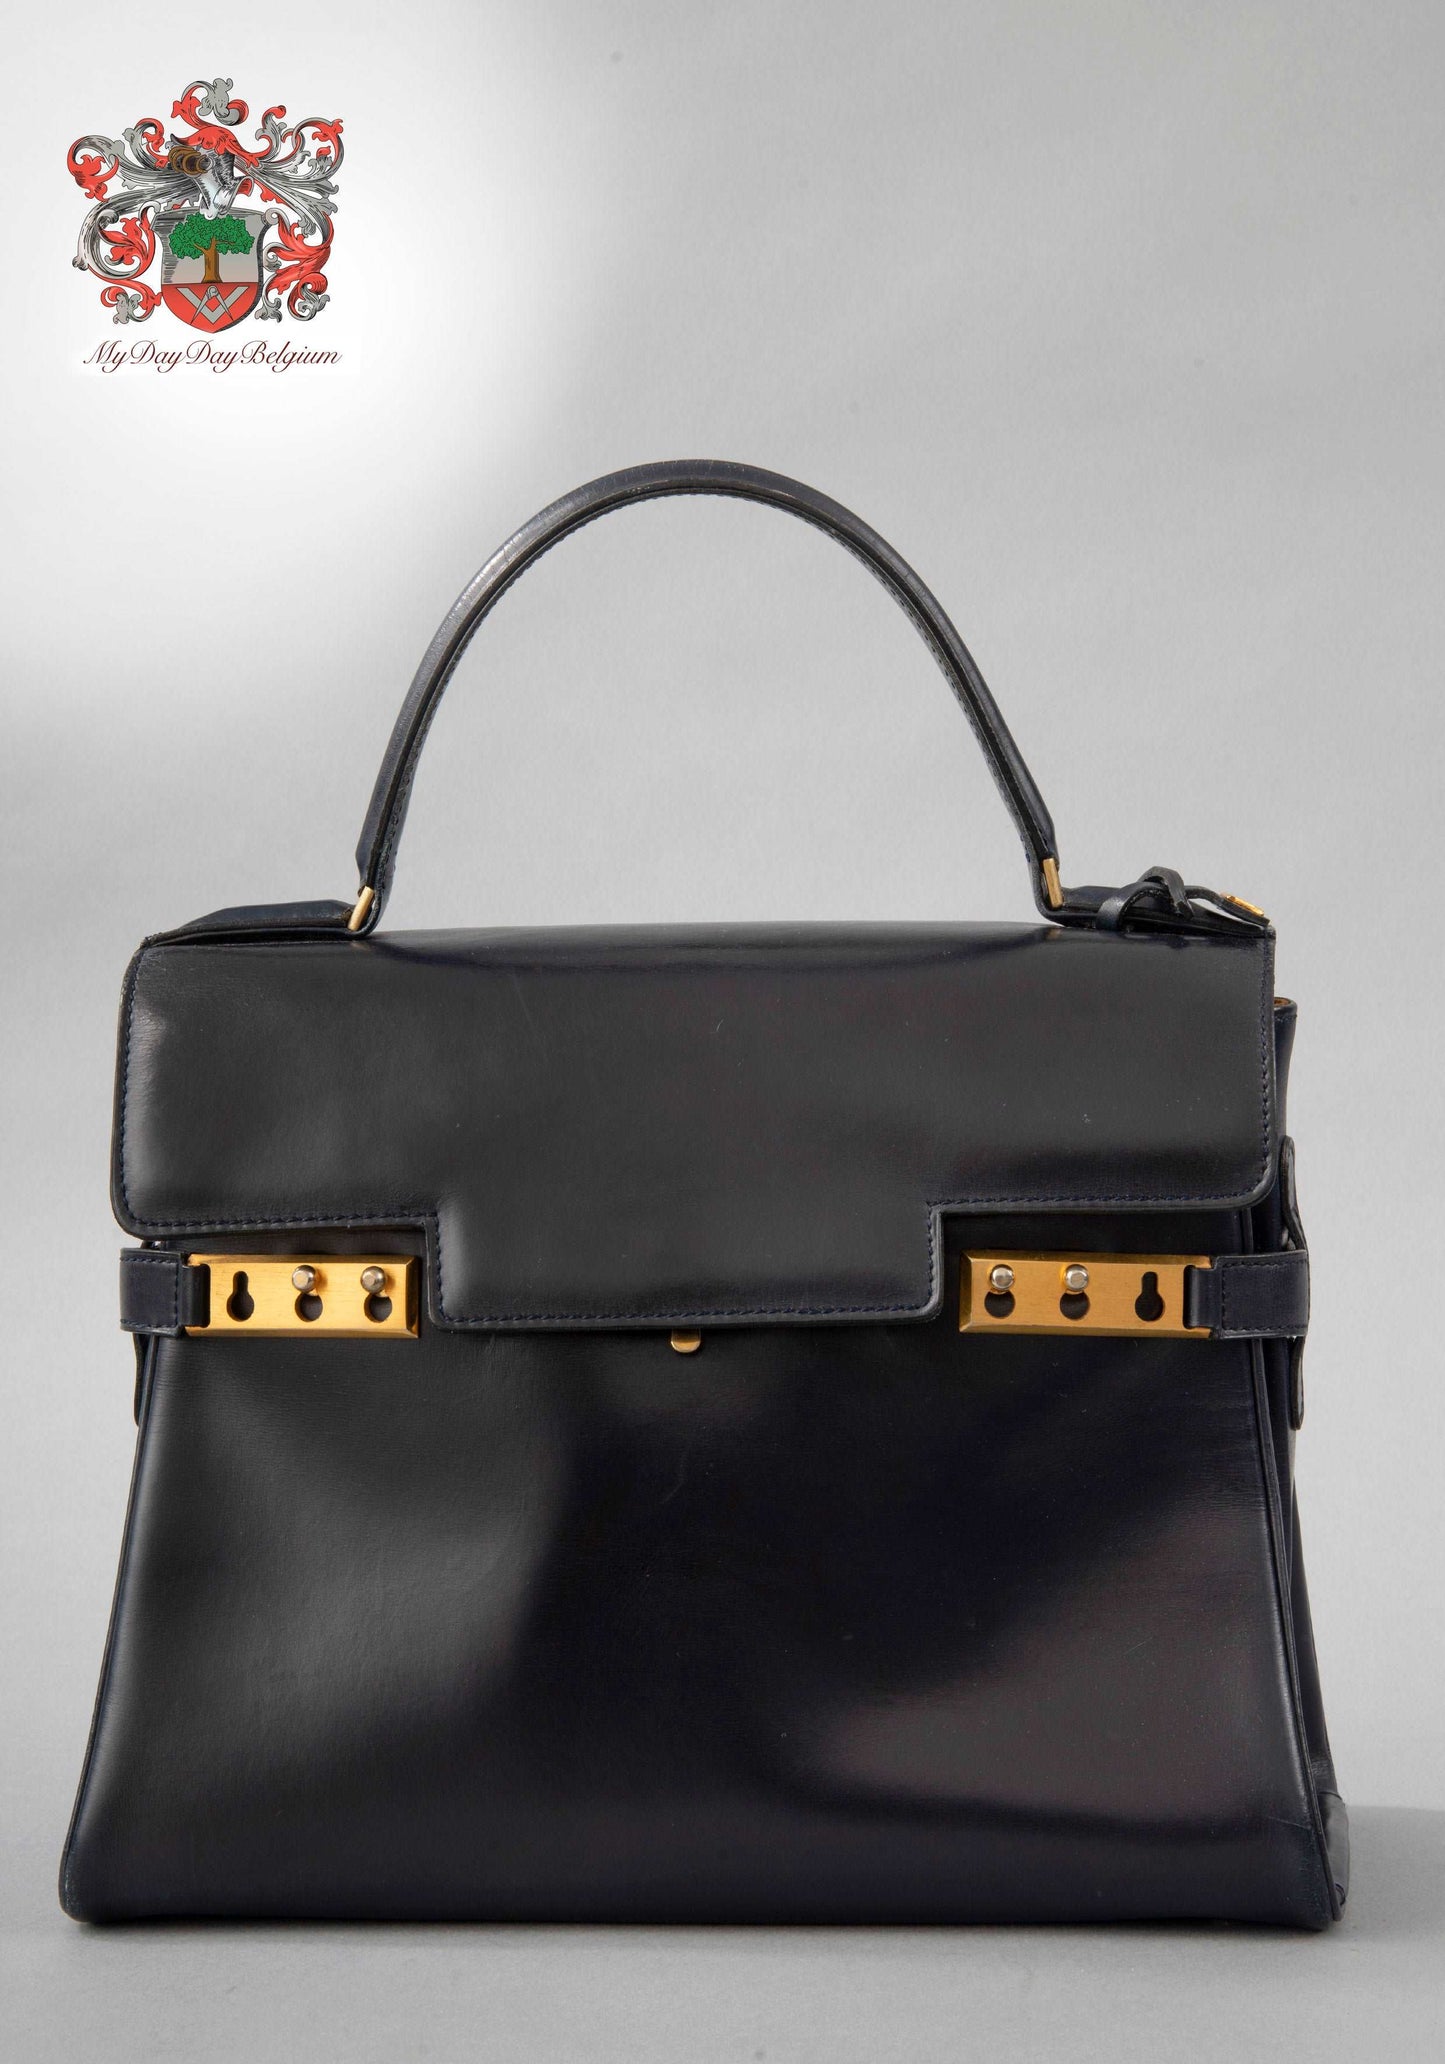 Delavux, Bags, Delvaux Tempete Mini Satchel Black Smooth Leather